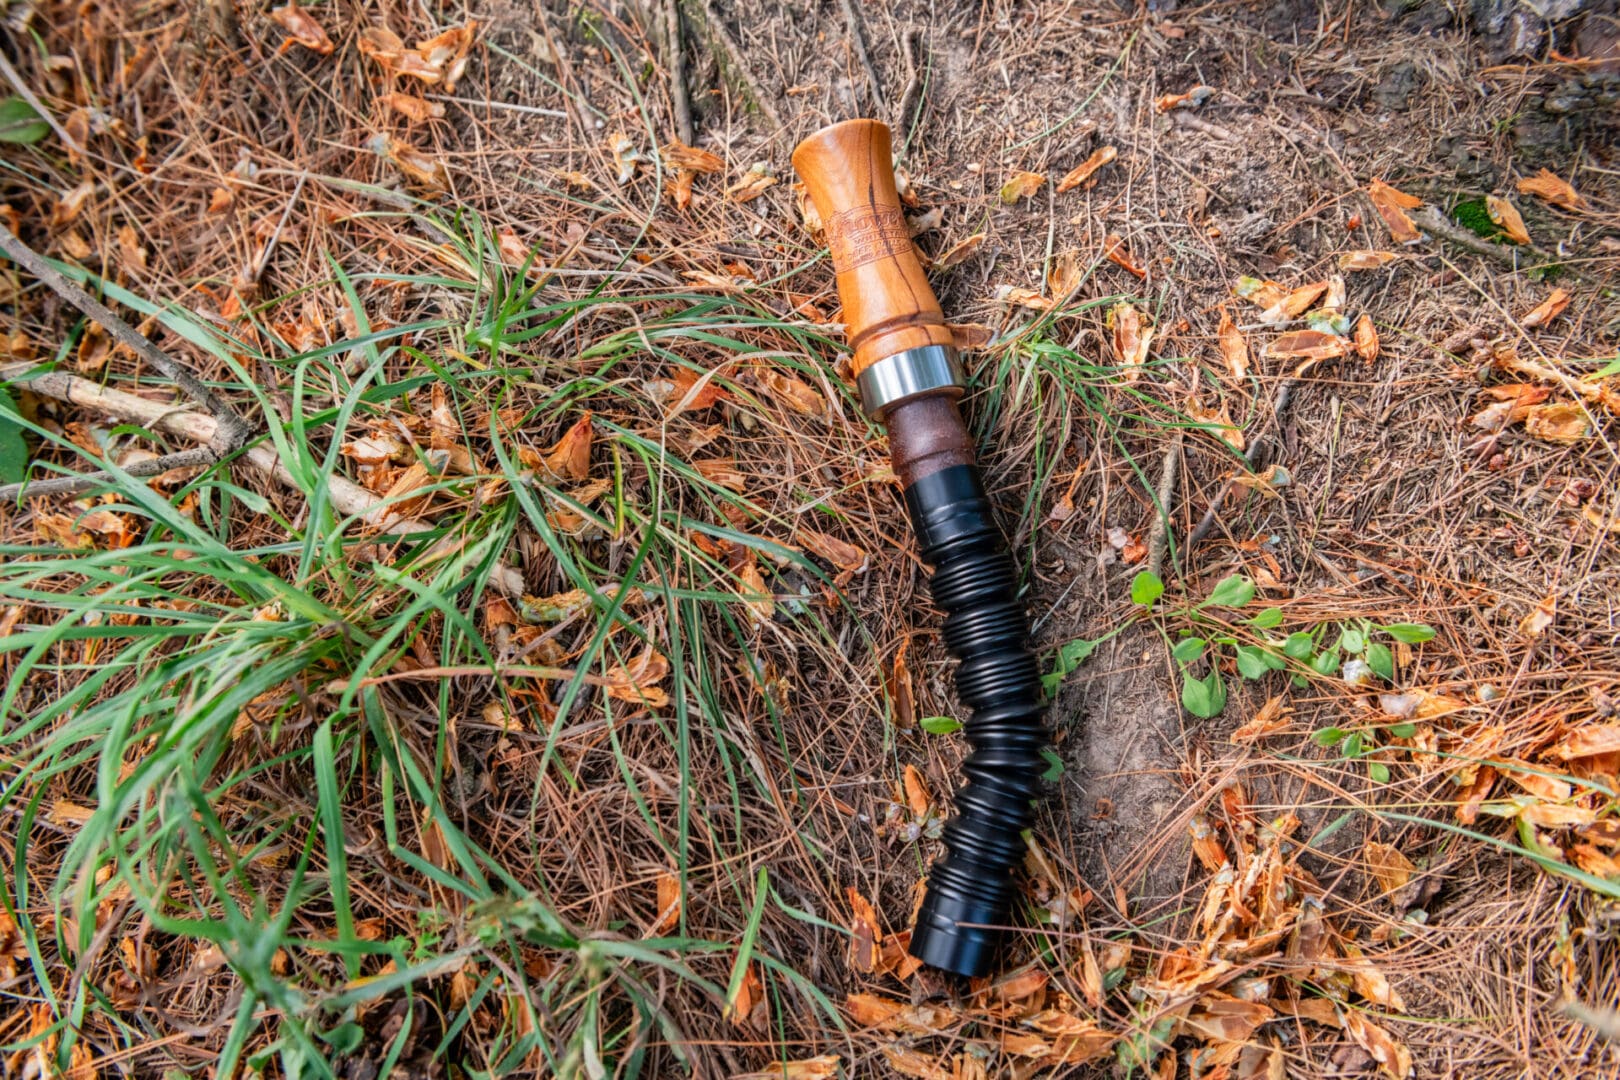 A broken flashlight laying on the ground in the grass.